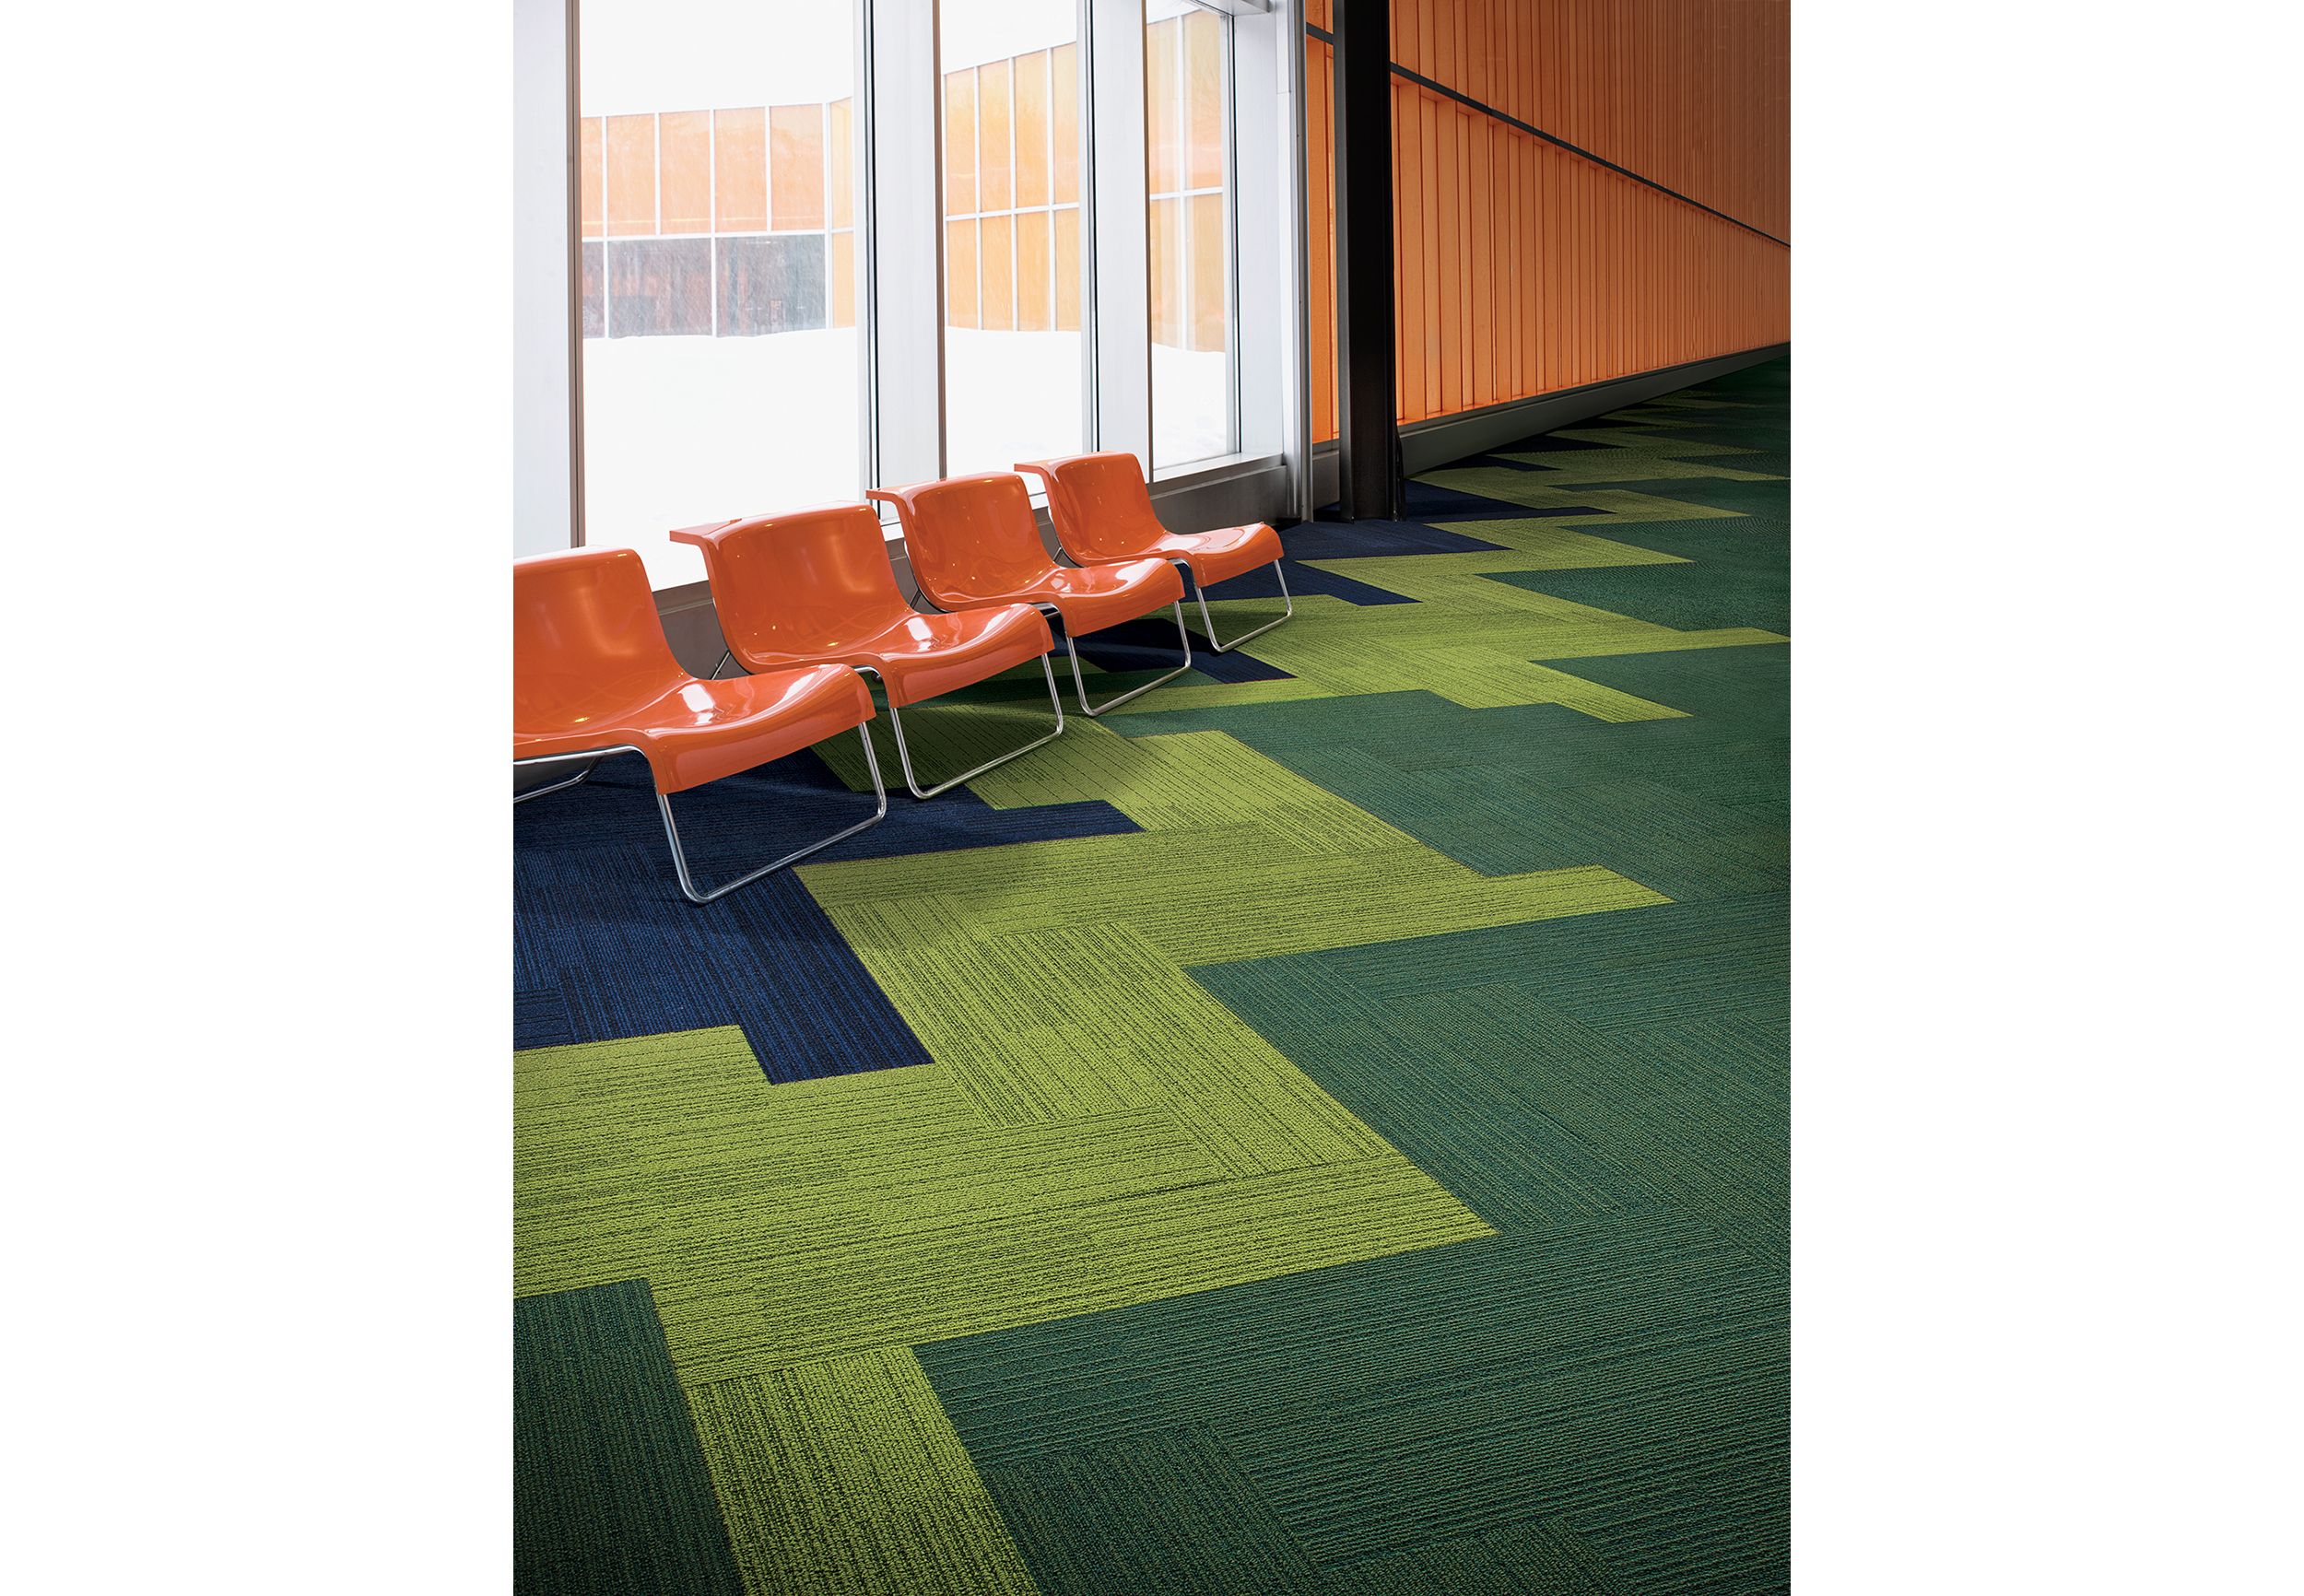 Interface On Line plank carpet tile in waiting area with orange hard plastic chairs against windows imagen número 4